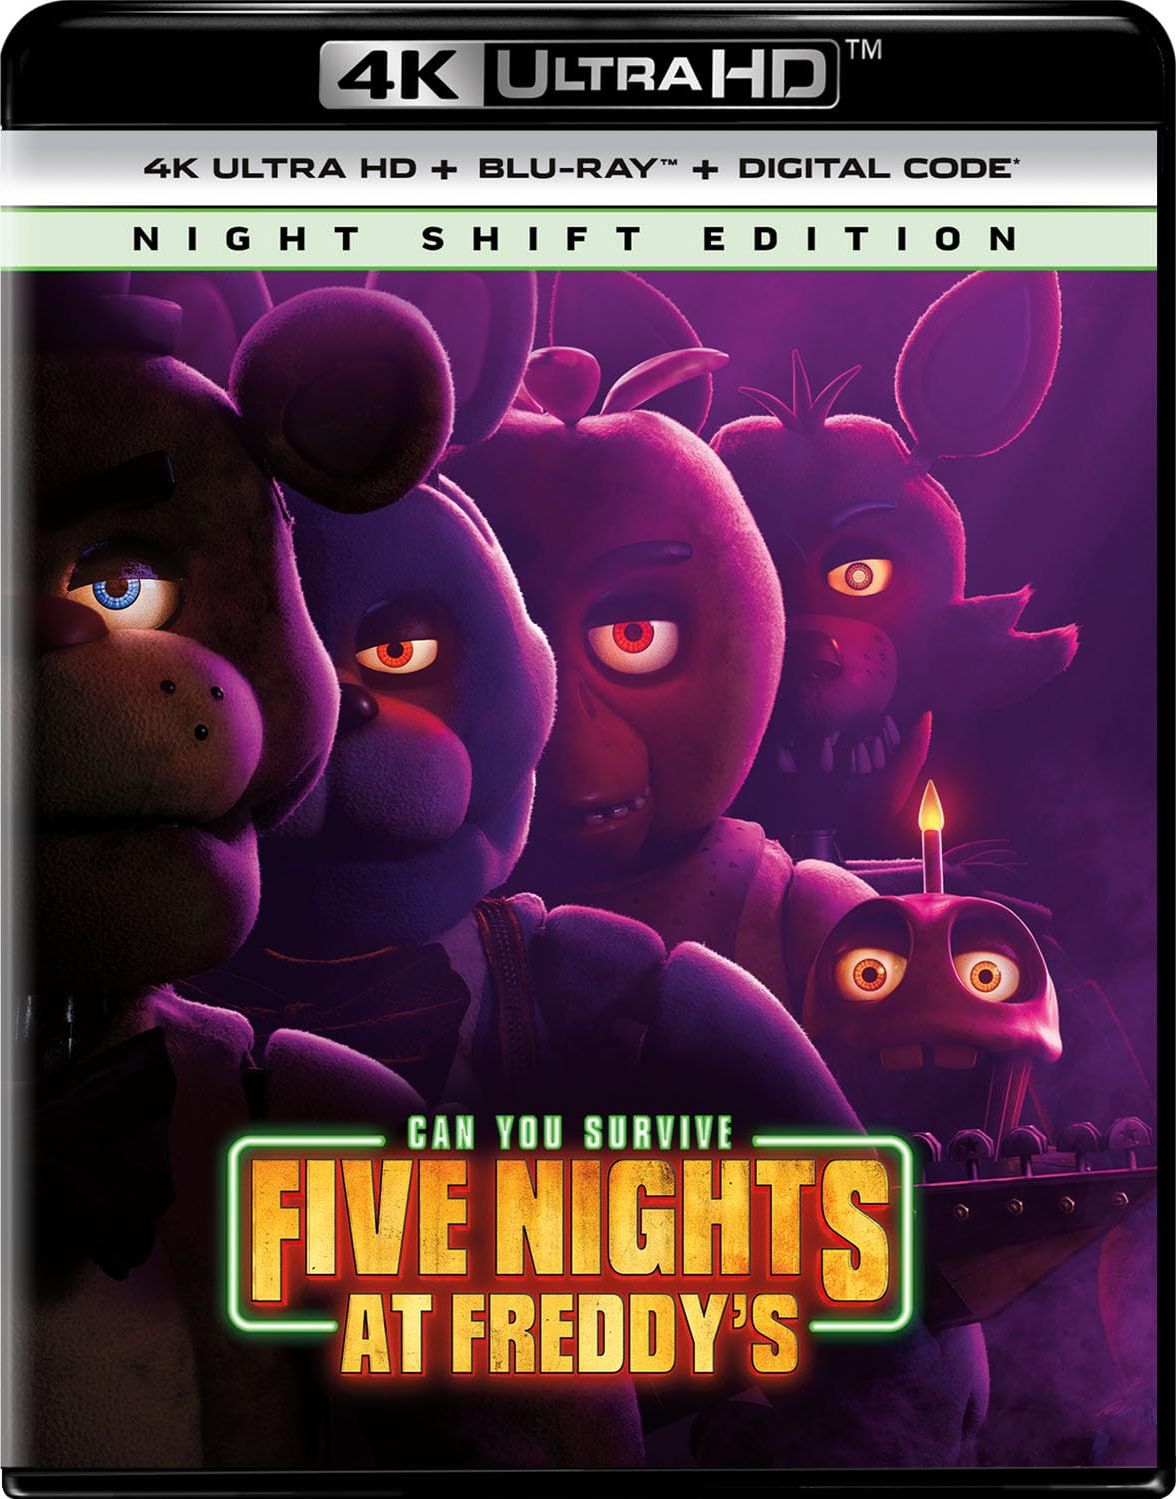 Five Nights at Freddy's (2023) Streaming Release Date: When Is It